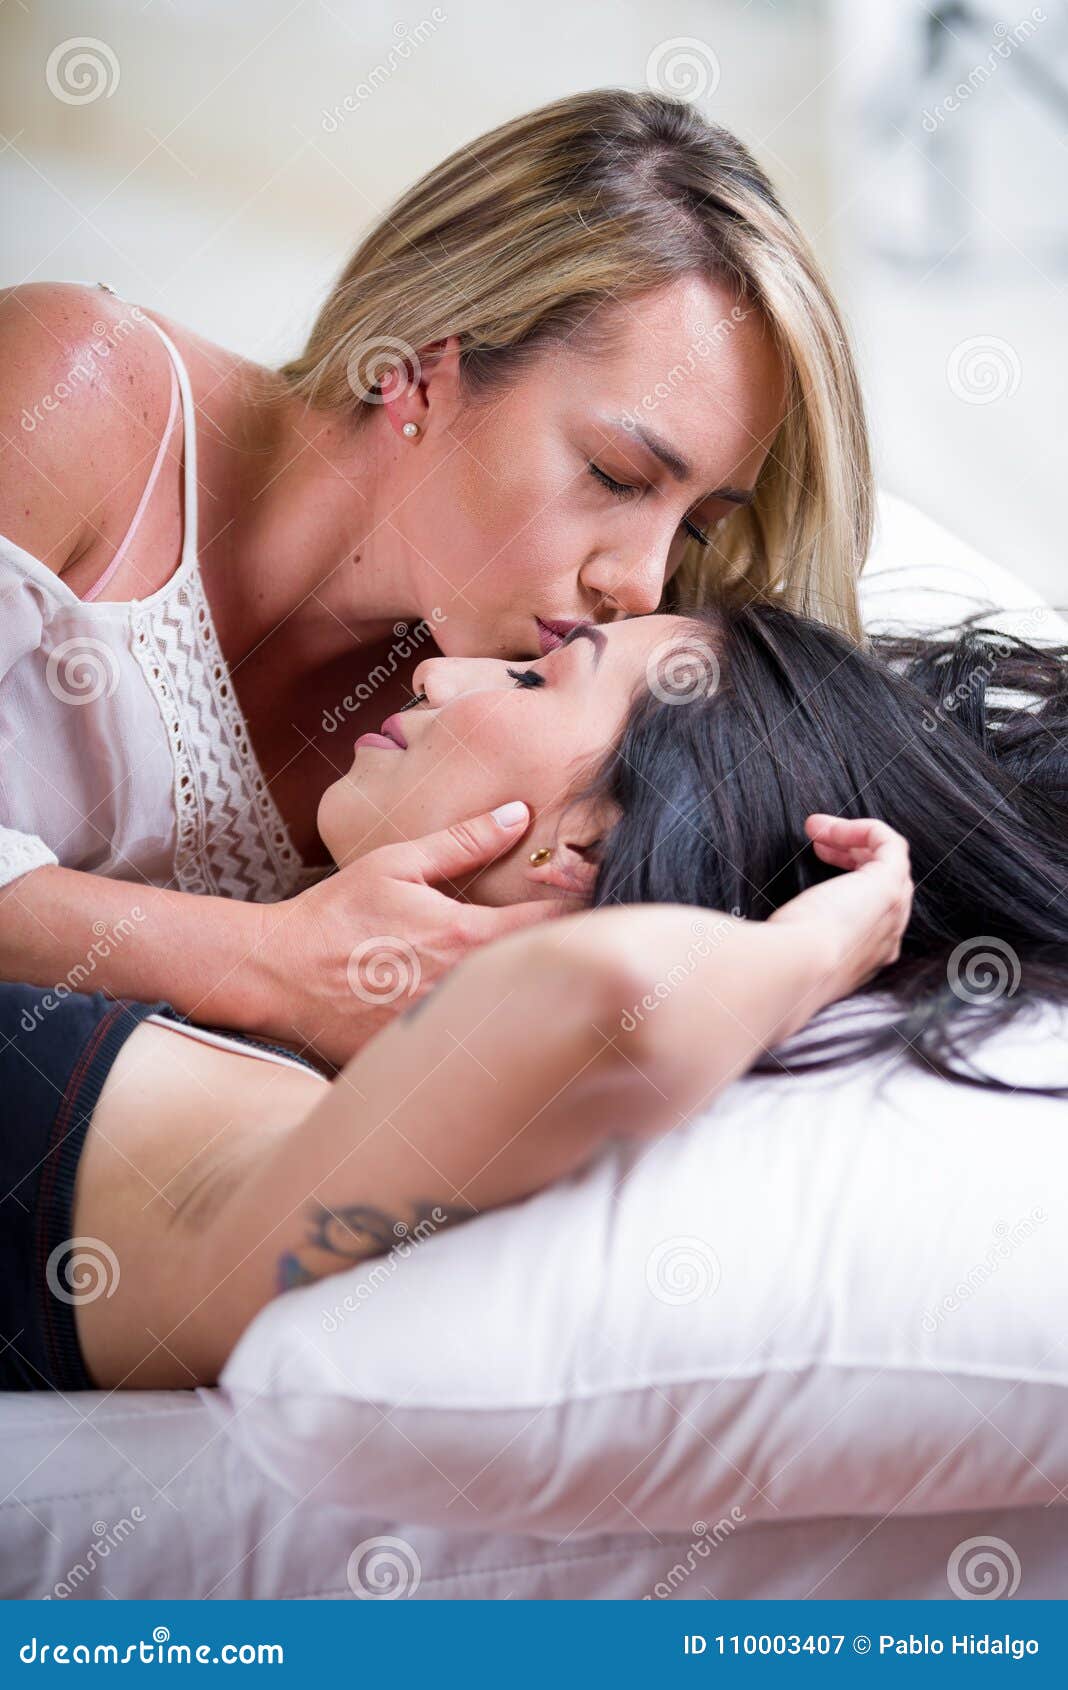 Lesbians Making Out In Bed pfalz ladies